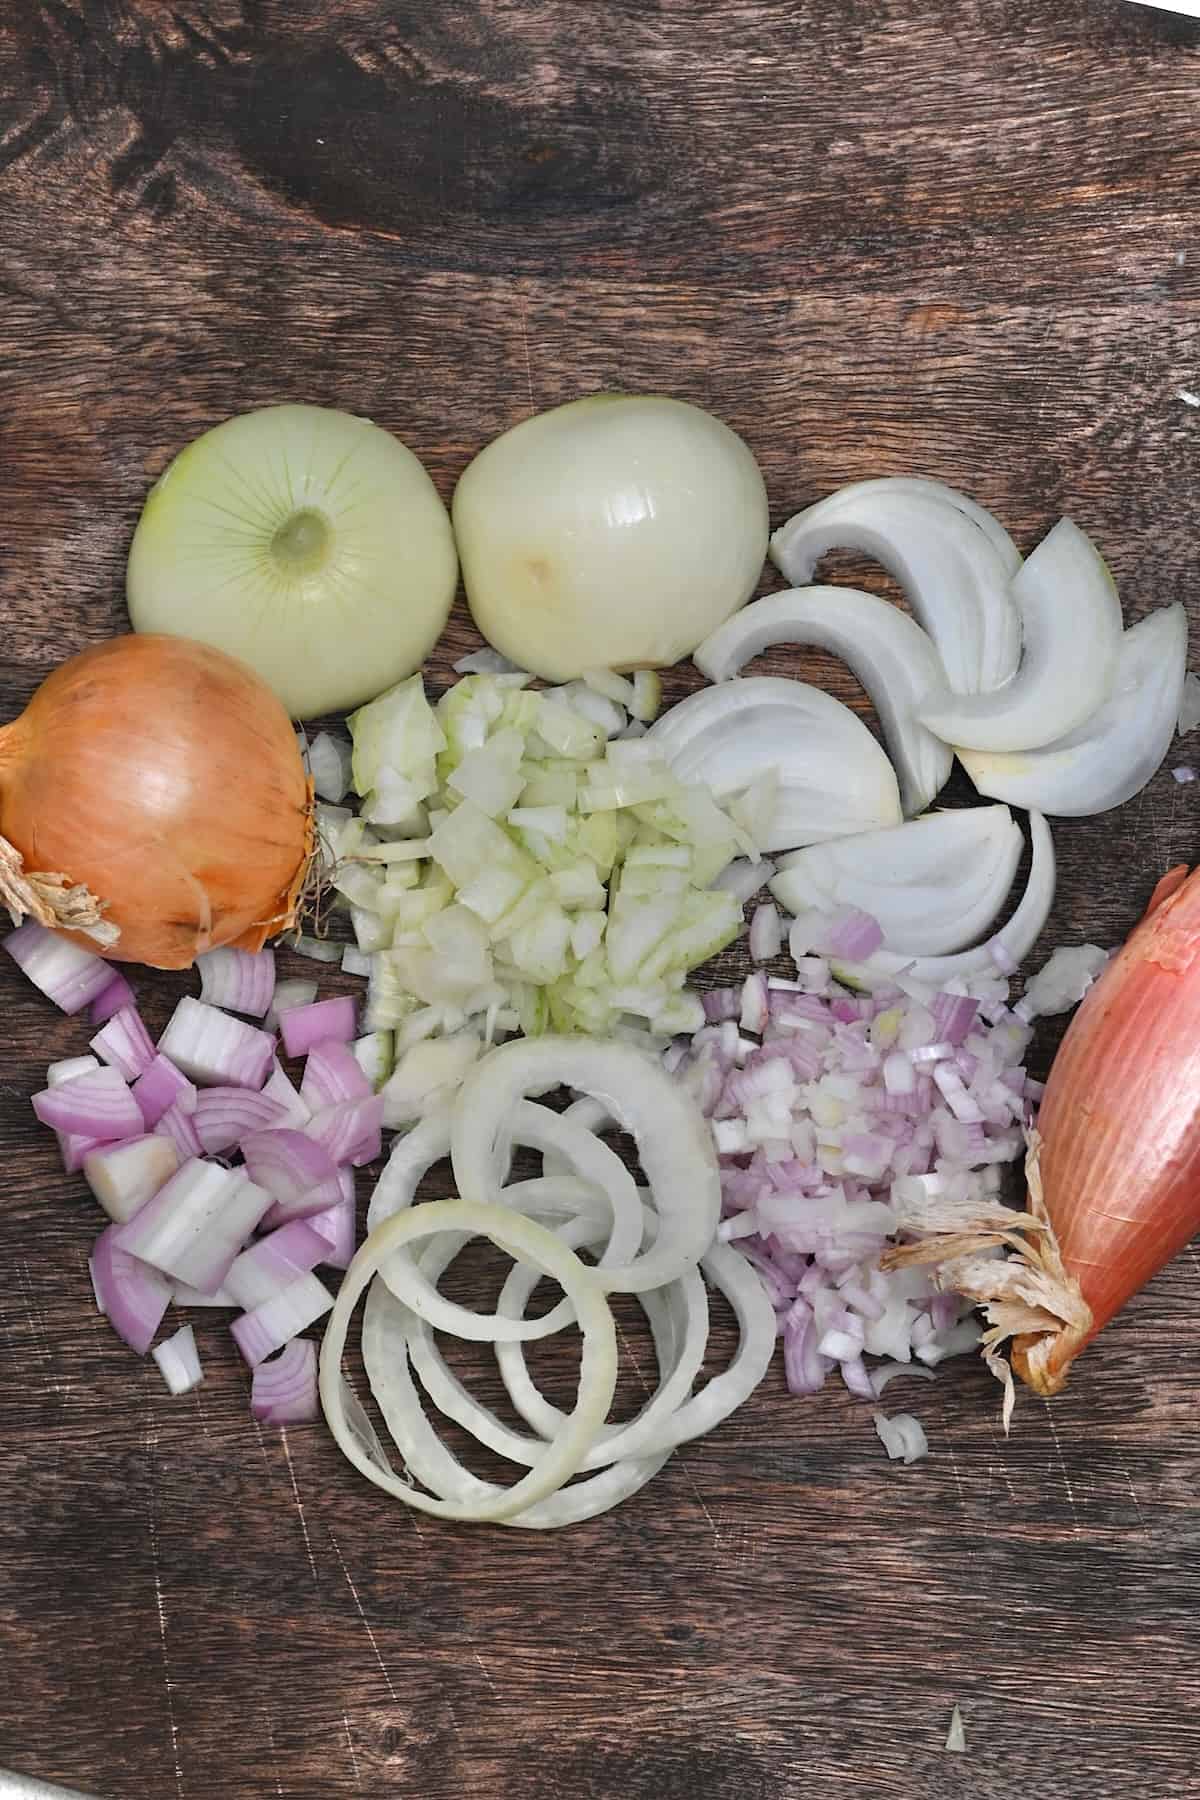 Different types of onions cut in different ways